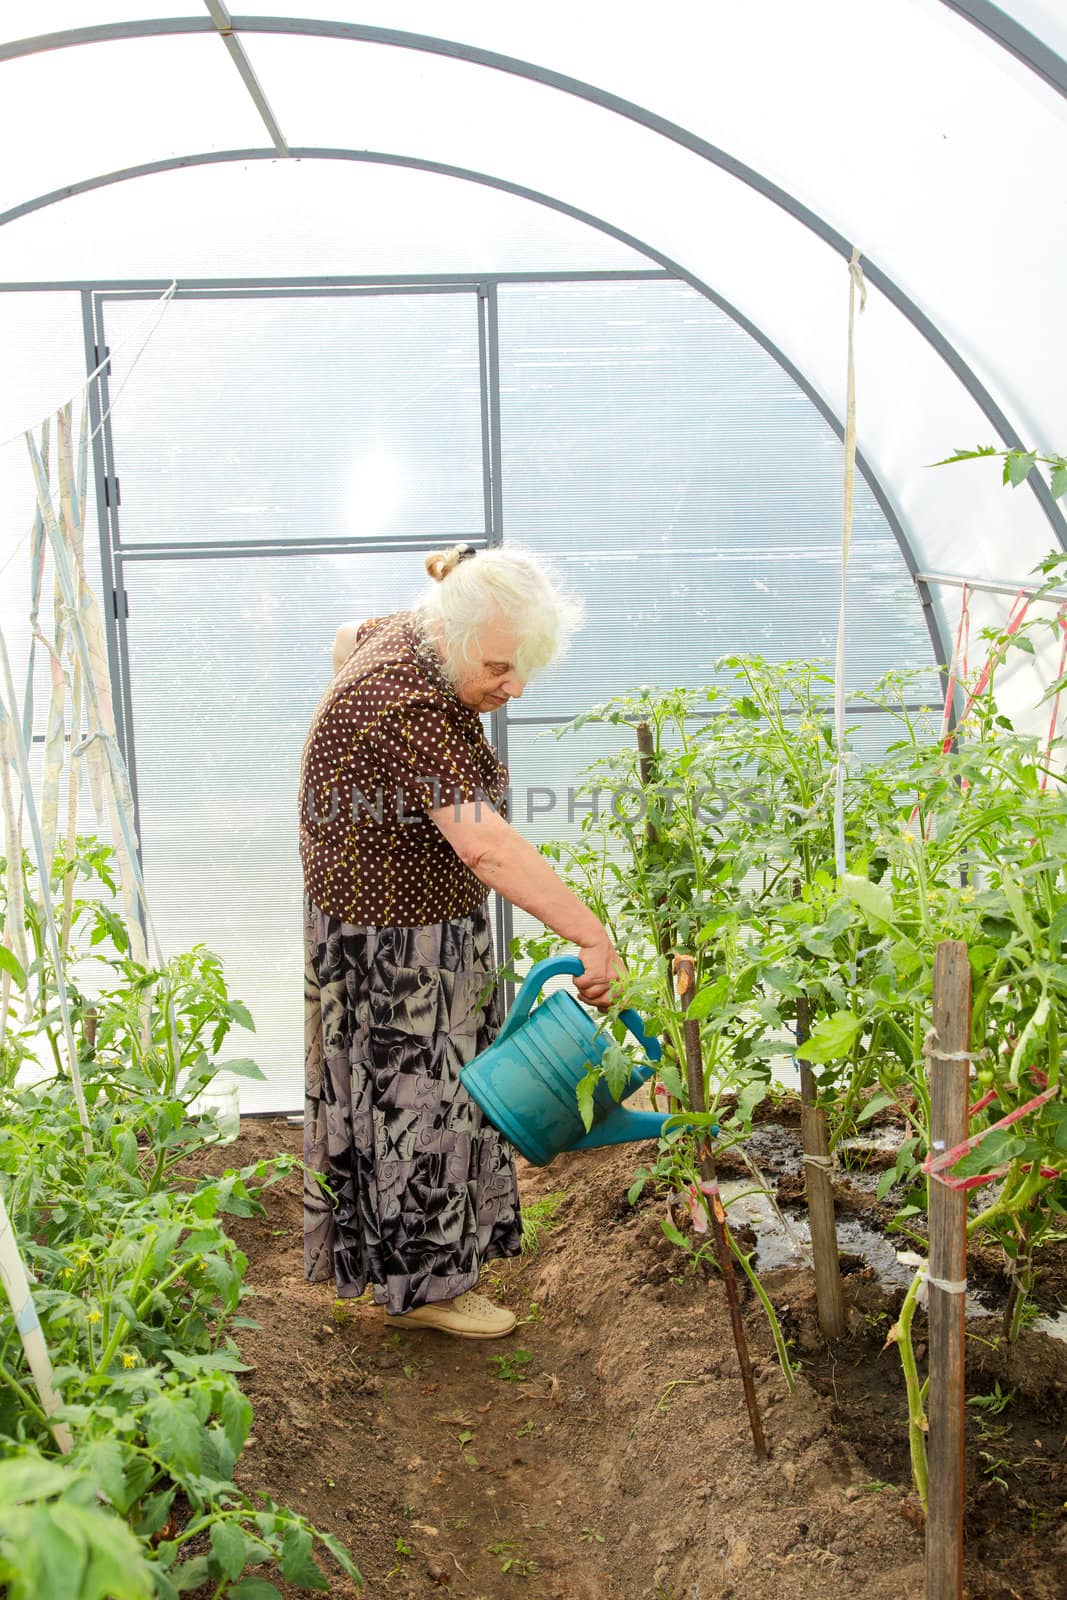 The old woman in a hothouse waters tomatoes